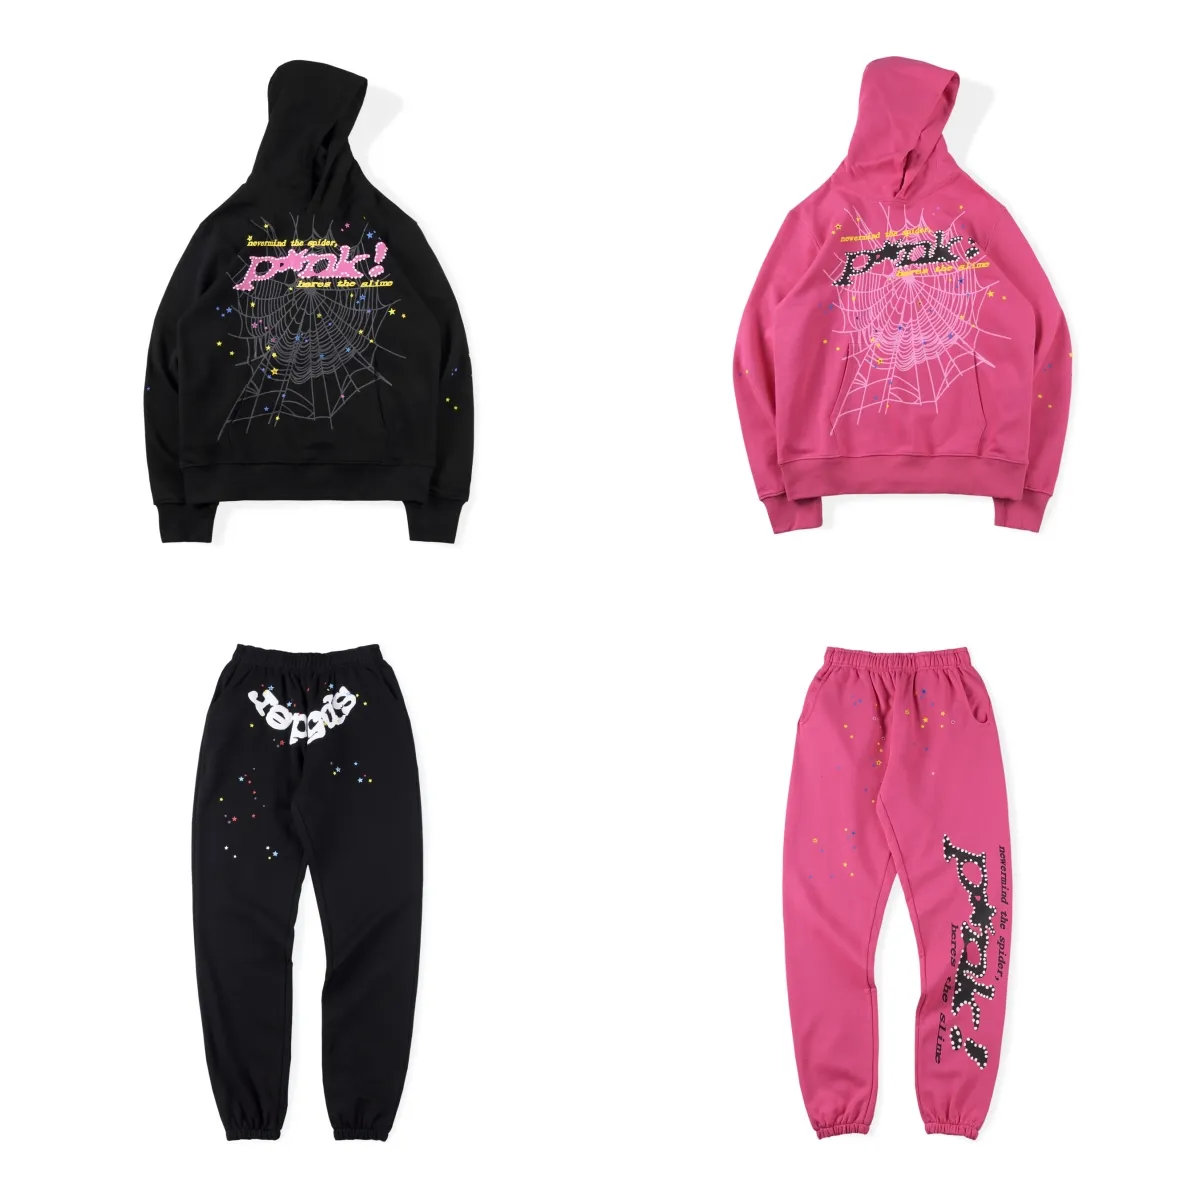 555 Spider Hoodie Sp5der Worldwide Pink Young Thug Sweater Men's Woman  Nevermind Foam Print Pullover Clothing